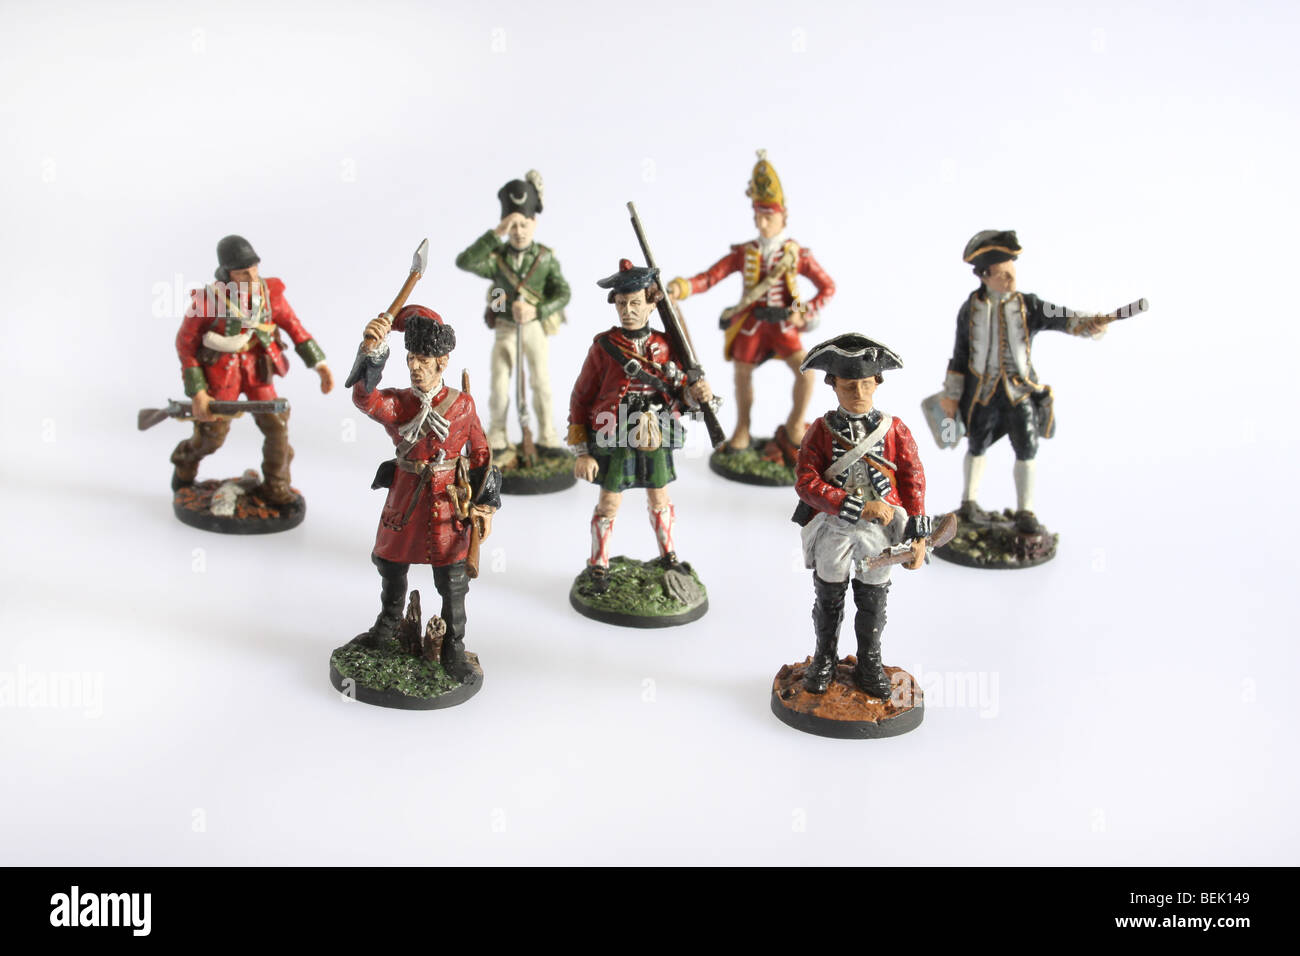 A collection of British Empire soldiers from the 18th Century. Collectible Franklin Mint soldiers. Stock Photo